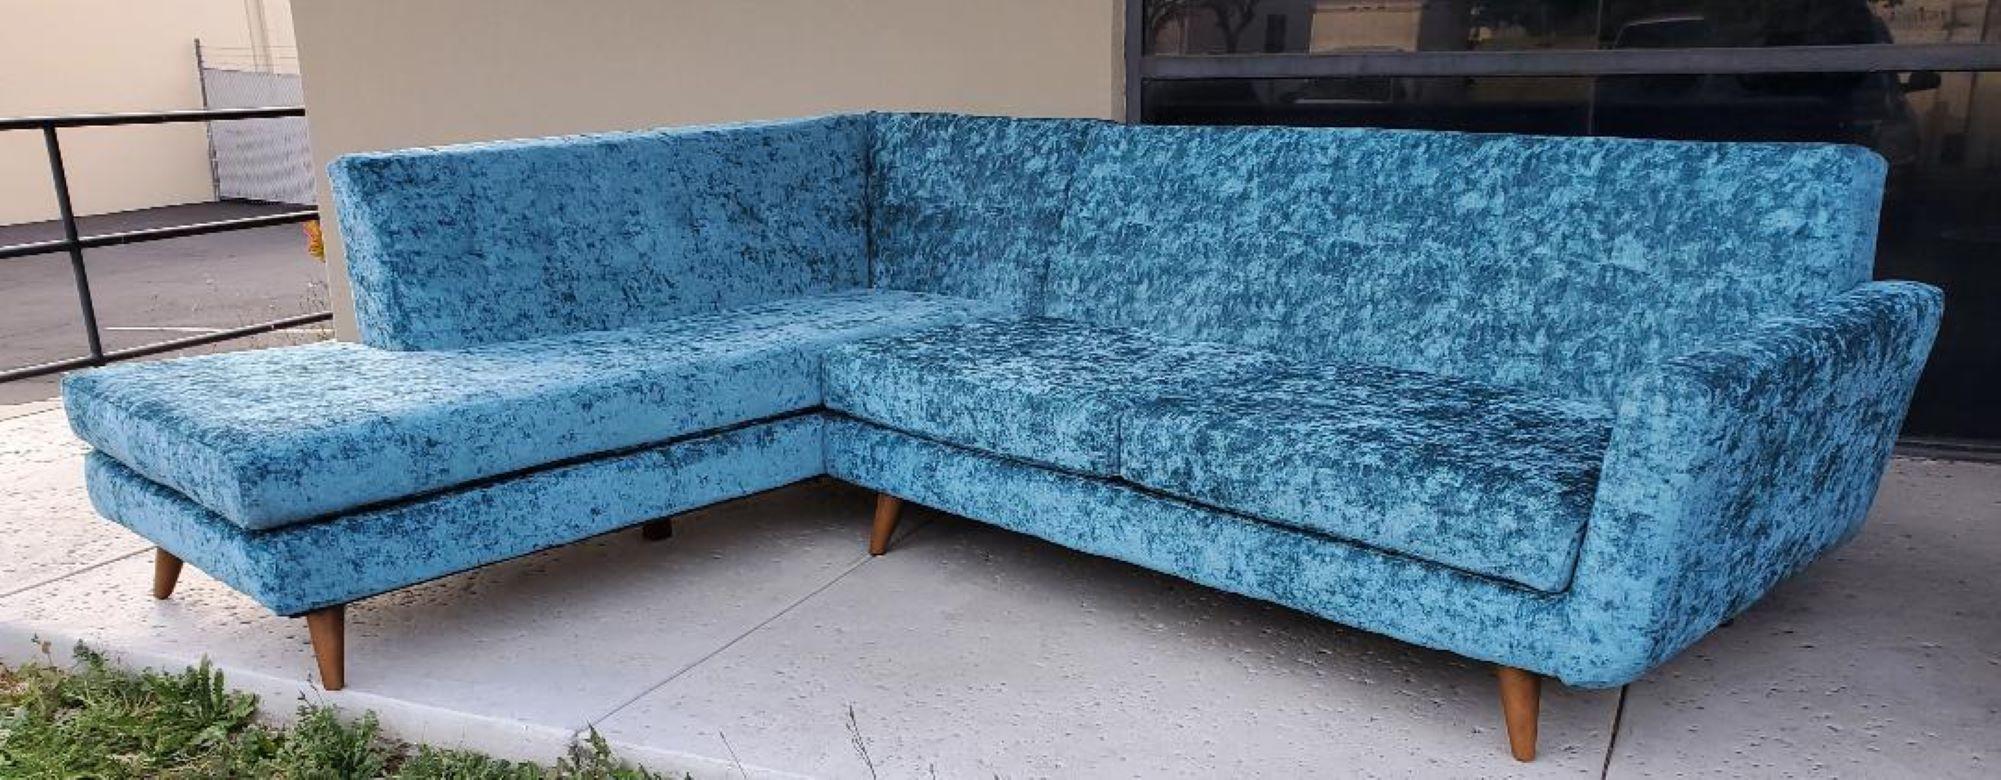 60s Low Slung Style Sectional Tapered Legs Aqua Green Crushed Velvet Upholstery For Sale 3